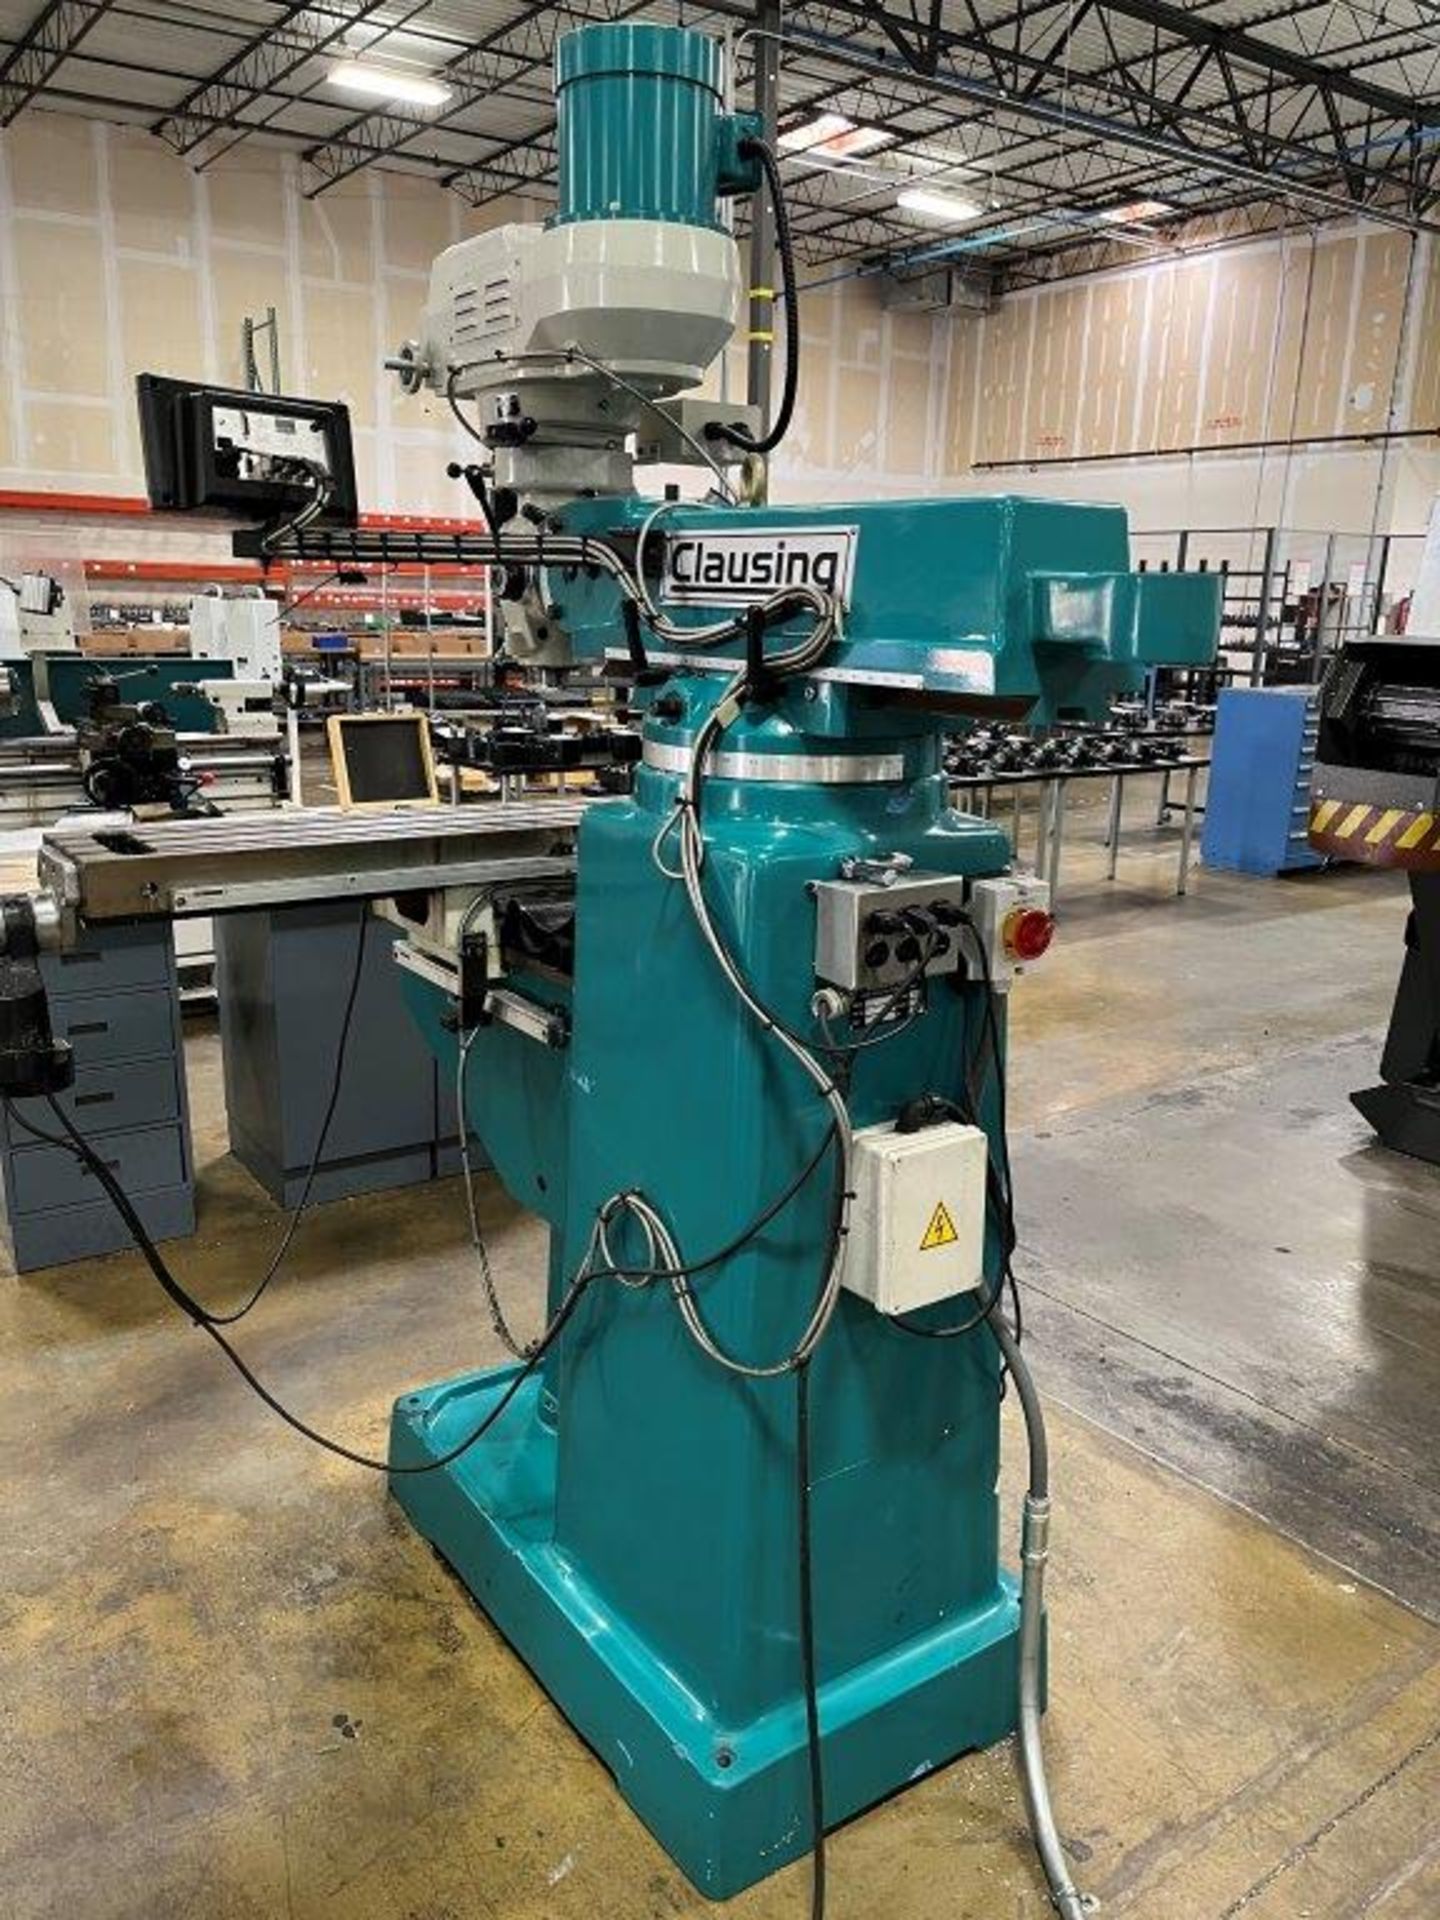 Clausing 3V08 3-HP Vertical Milling Machine - Image 8 of 8